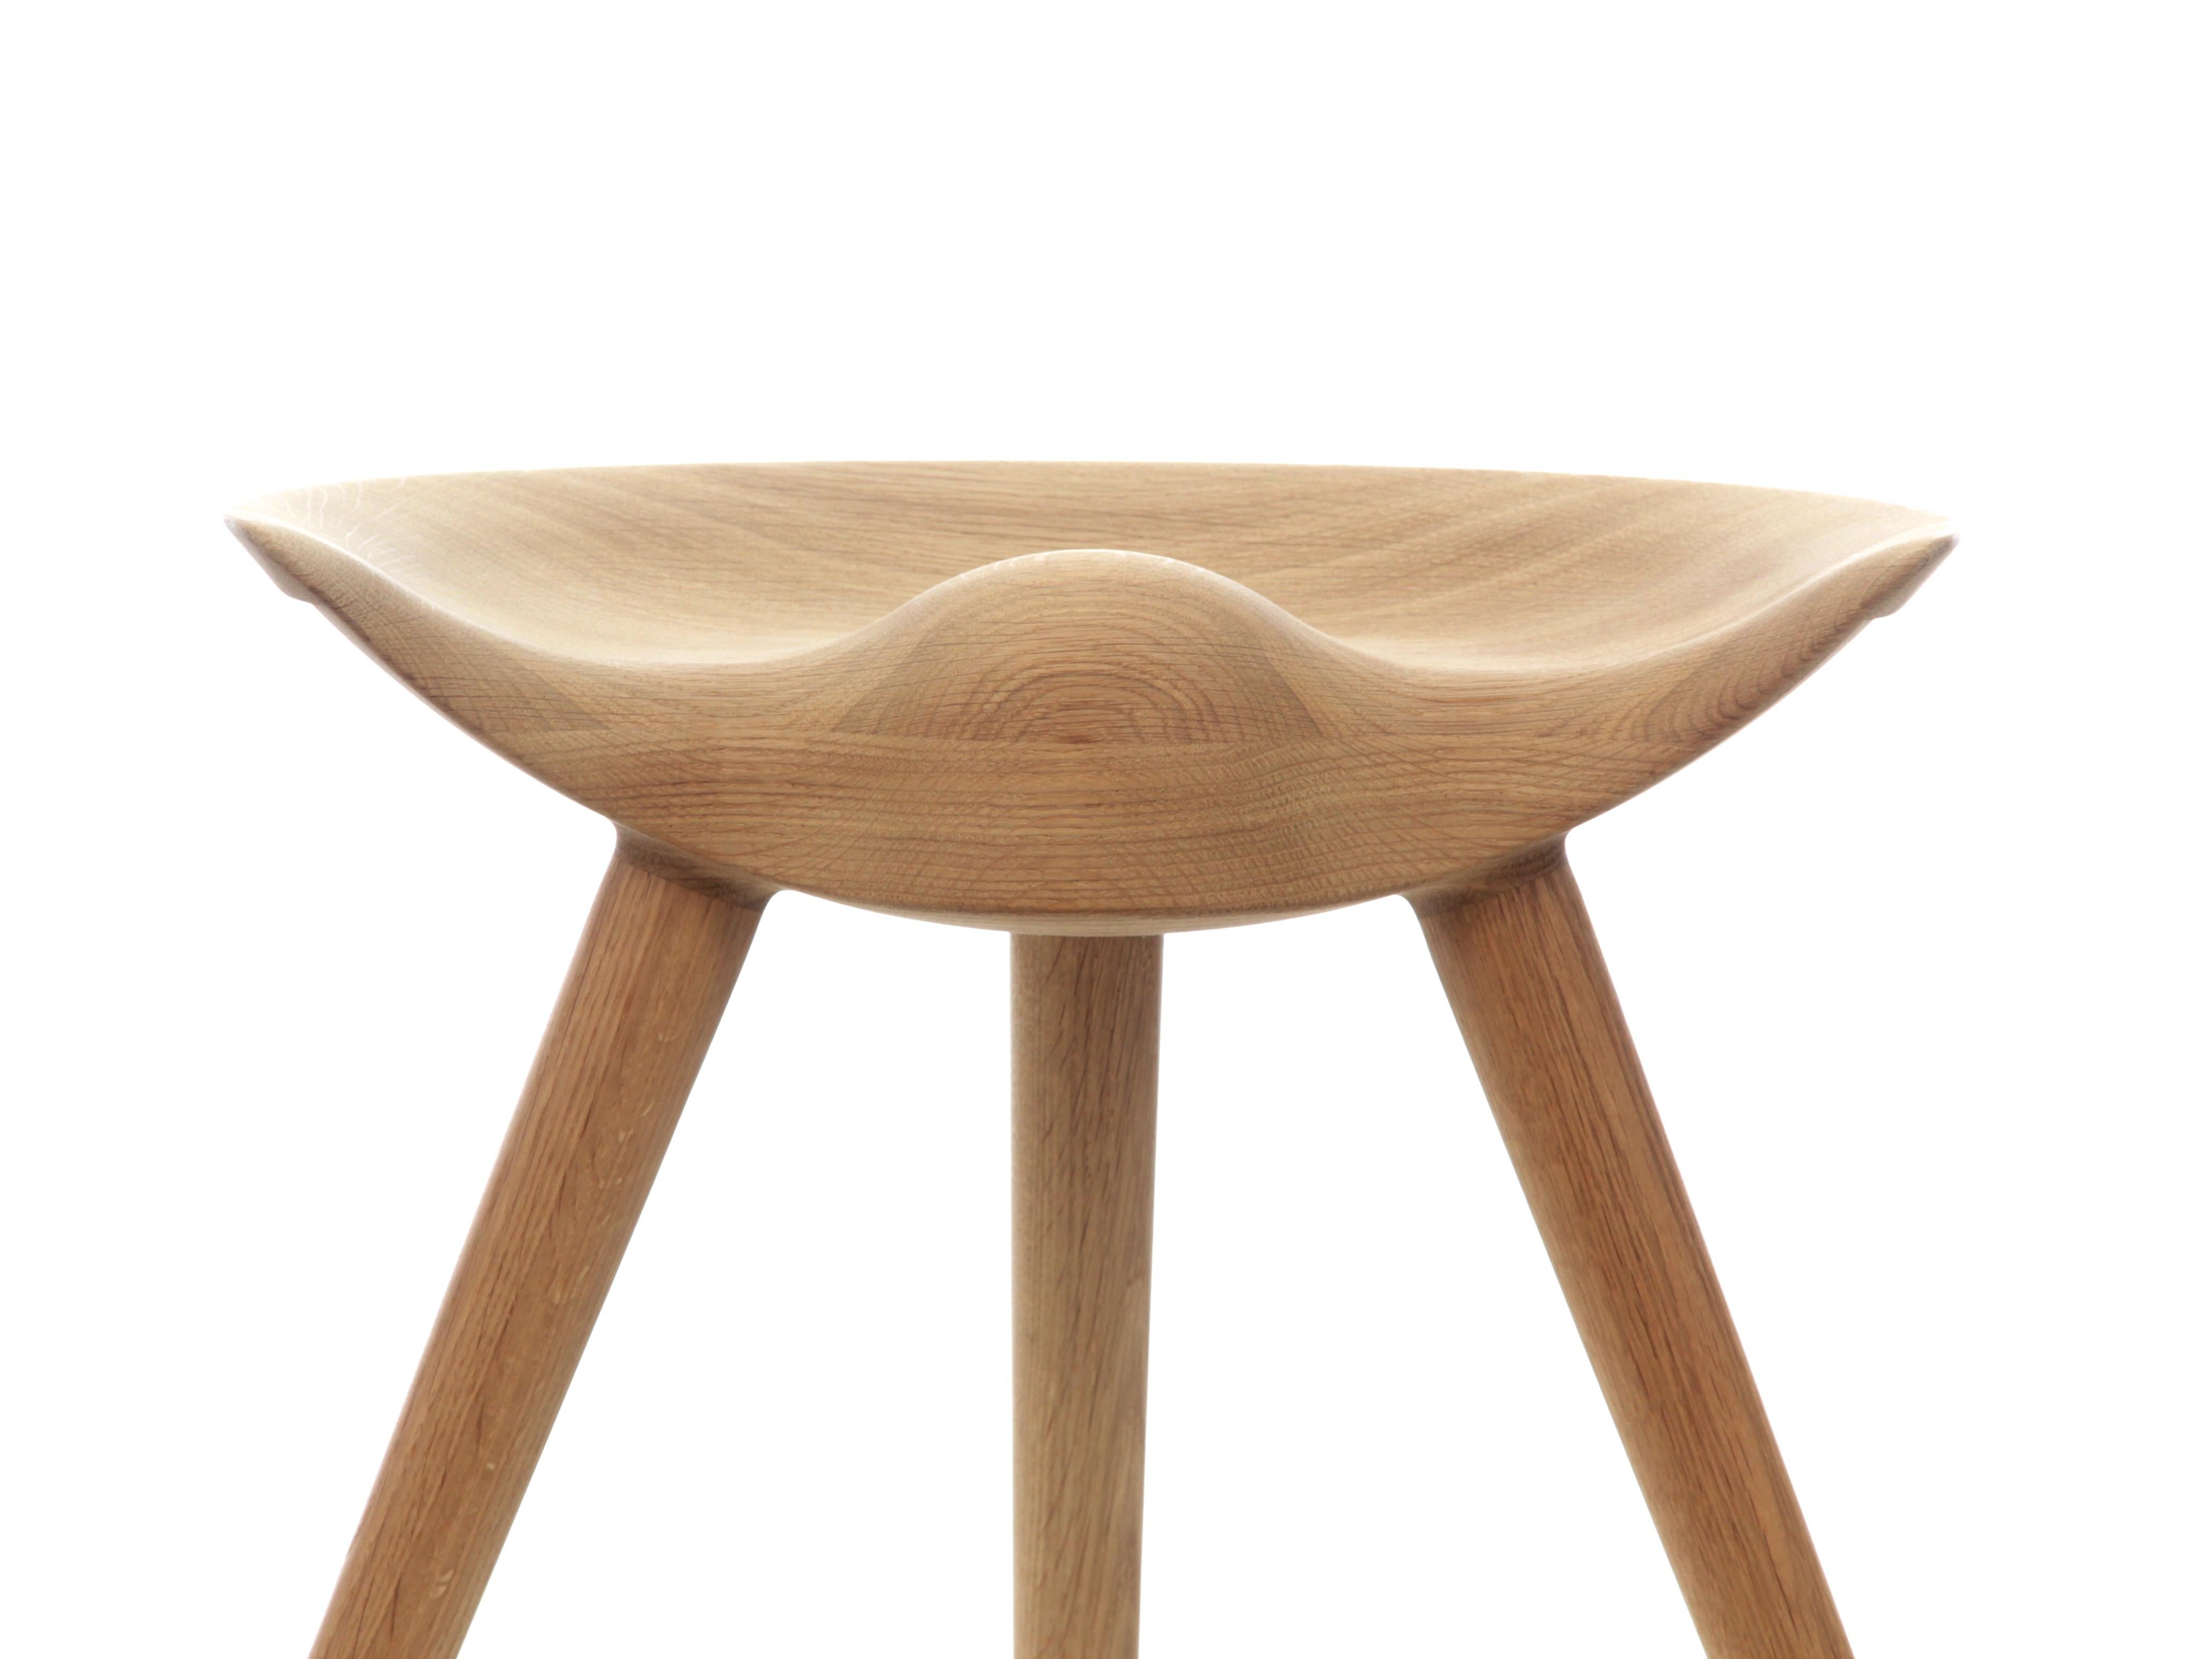 Mid-Century Modern Scandinavian stool model ML42 by Mogens Lassen, new edition. In 1942 Mogens Lassen designed the Stool ML42 as a piece for a furniture exhibition held at the Danish Museum of Decorative Art. He took inspiration from the stools used